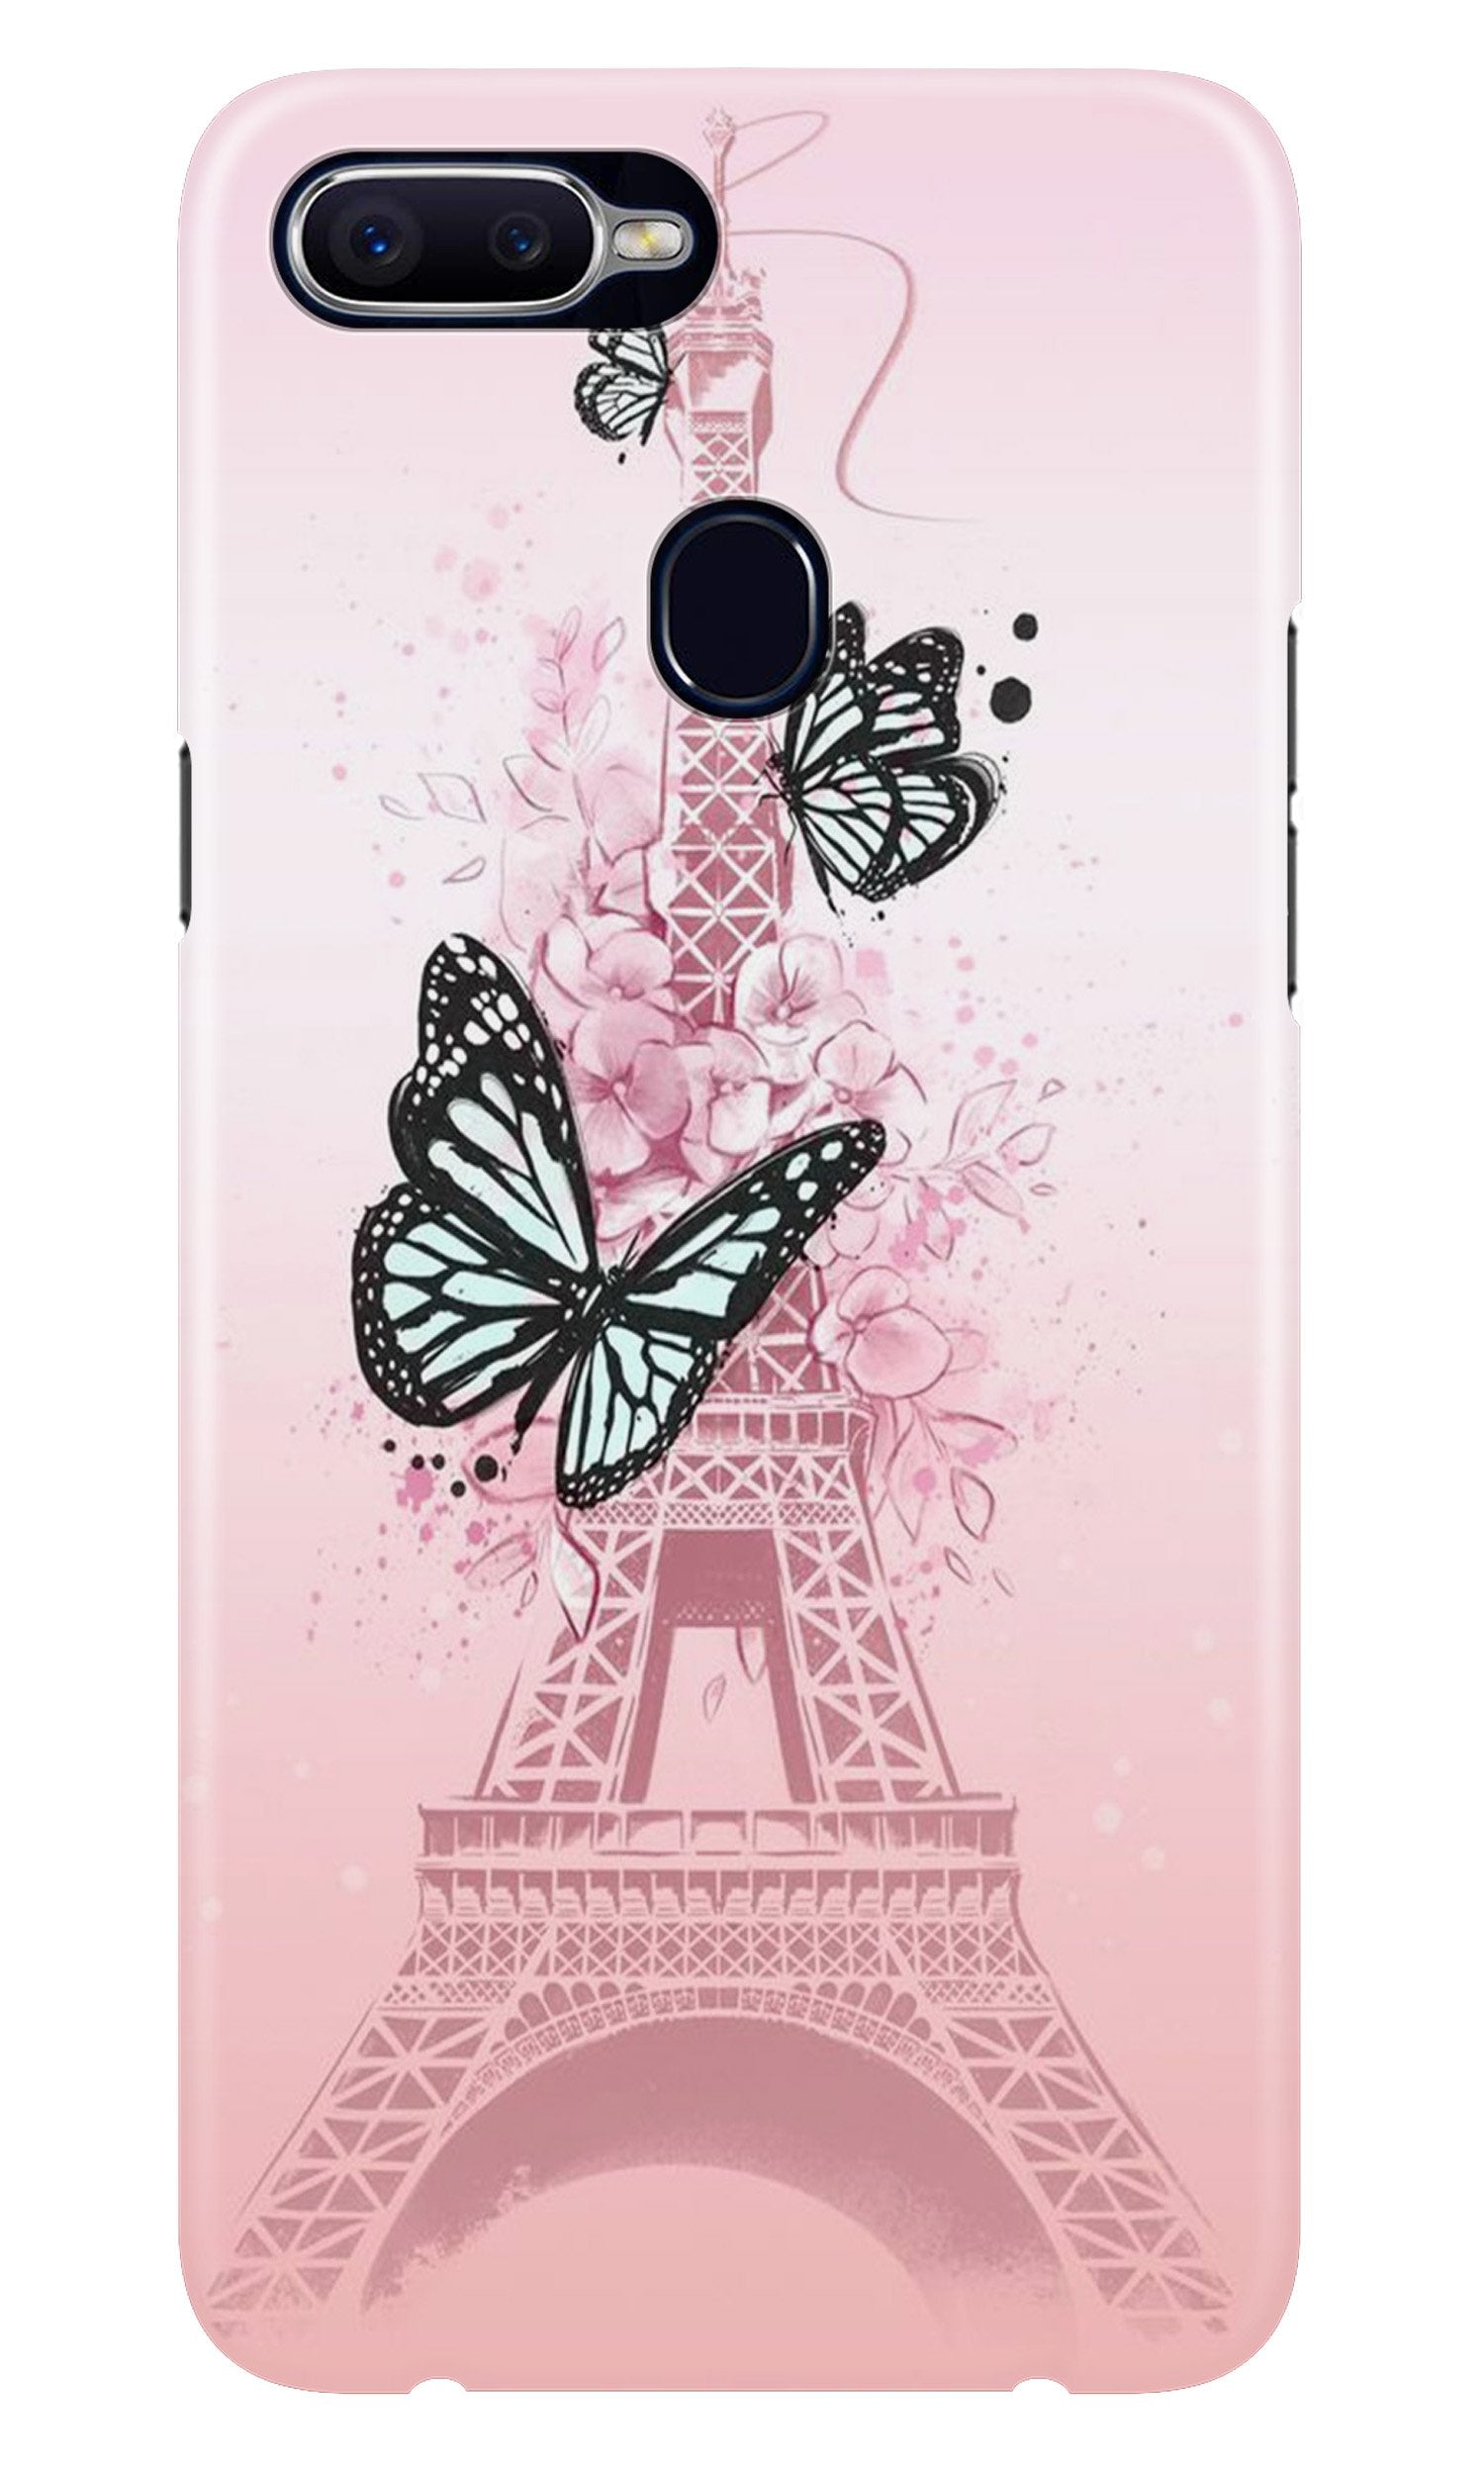 Eiffel Tower Case for Oppo A5s (Design No. 211)